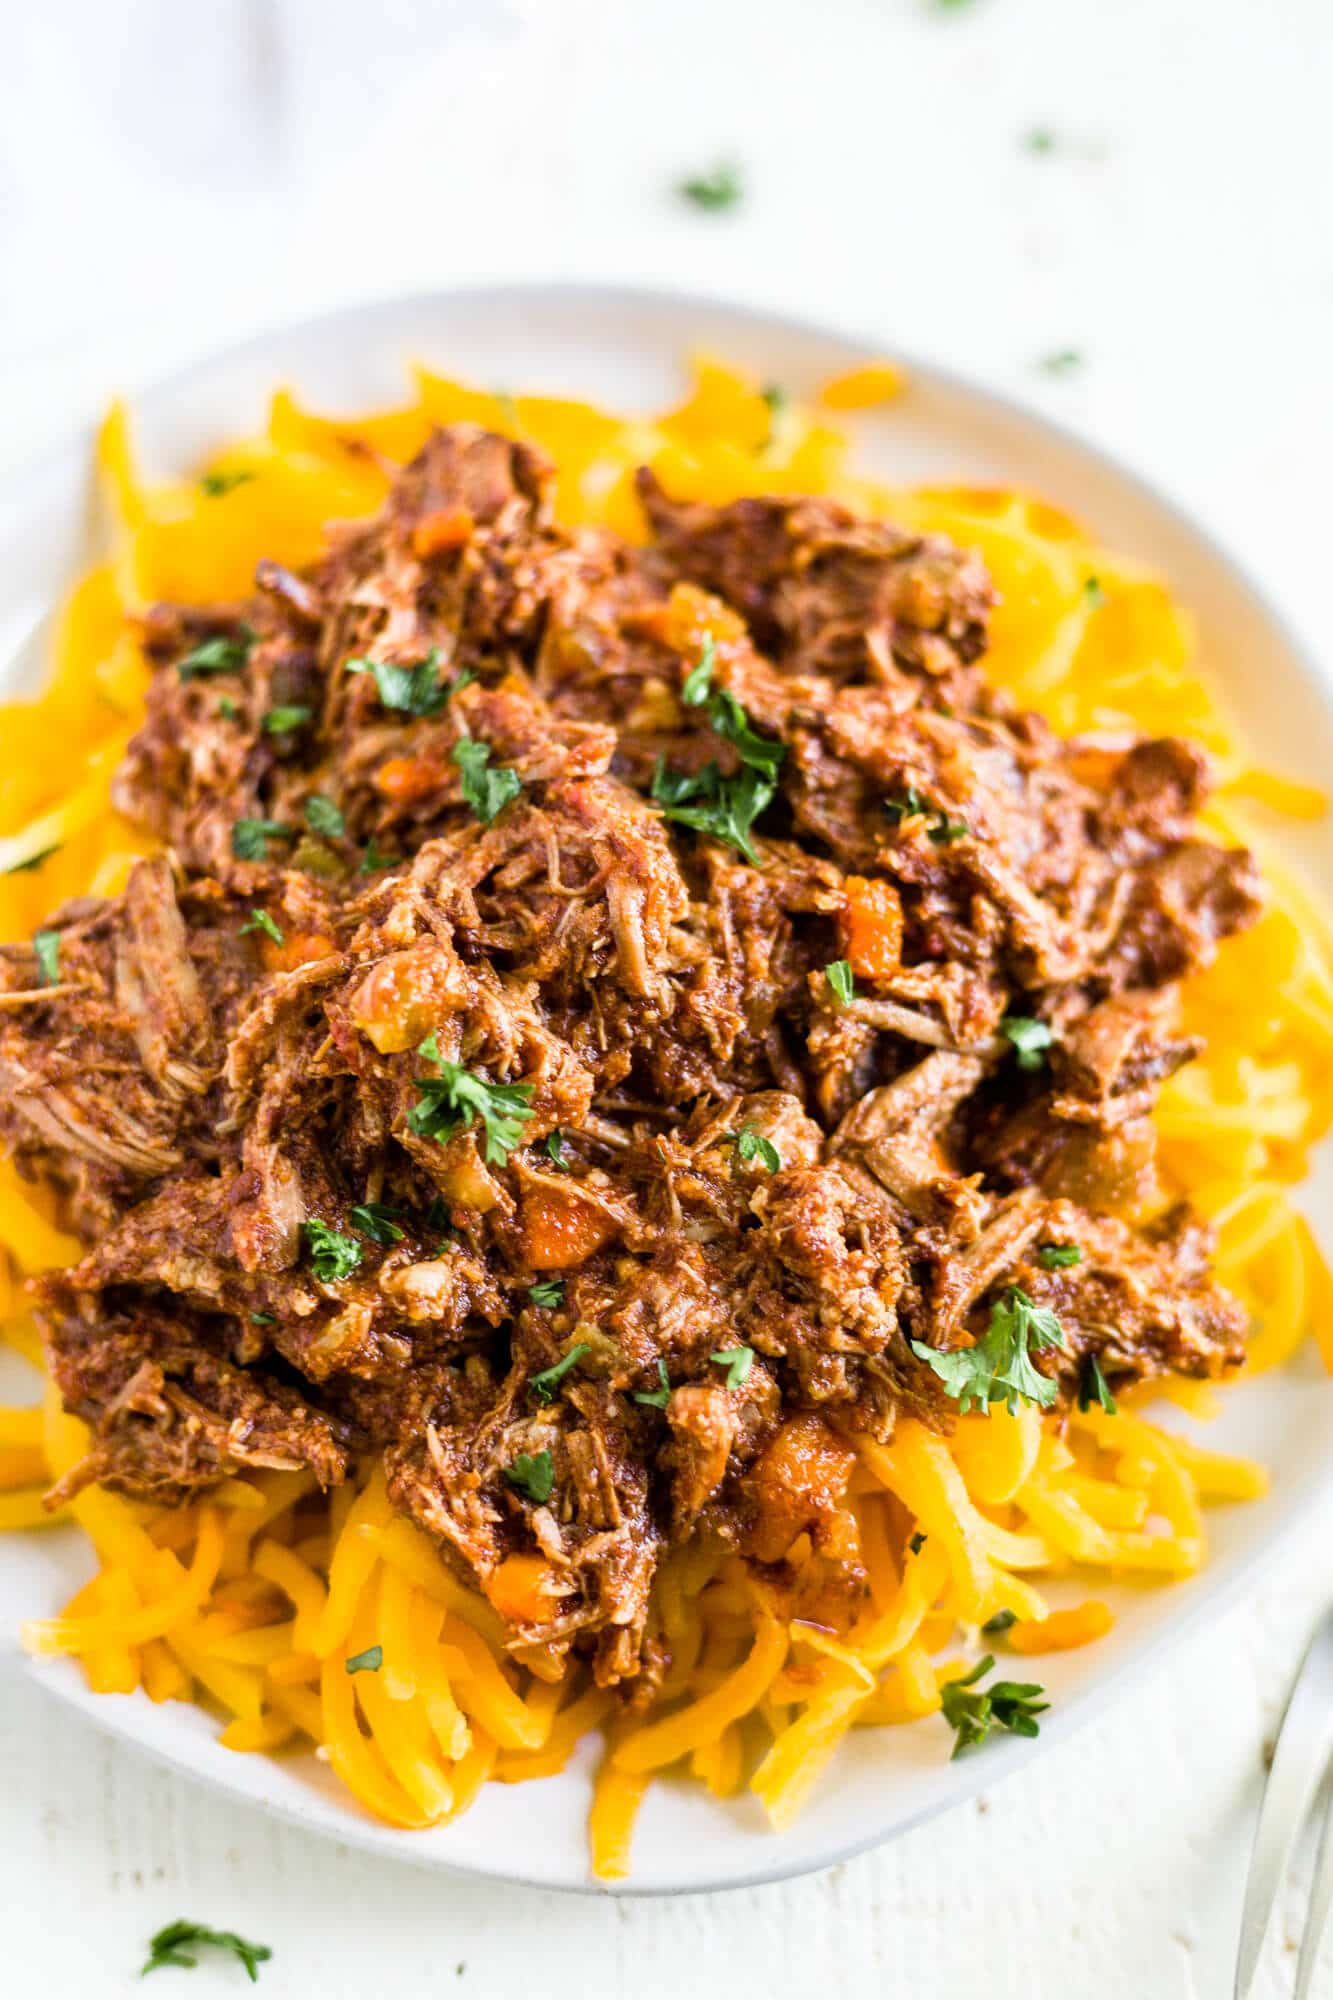 braised beef ragu on top of butternut squash noodles to make it a whole30 recipe